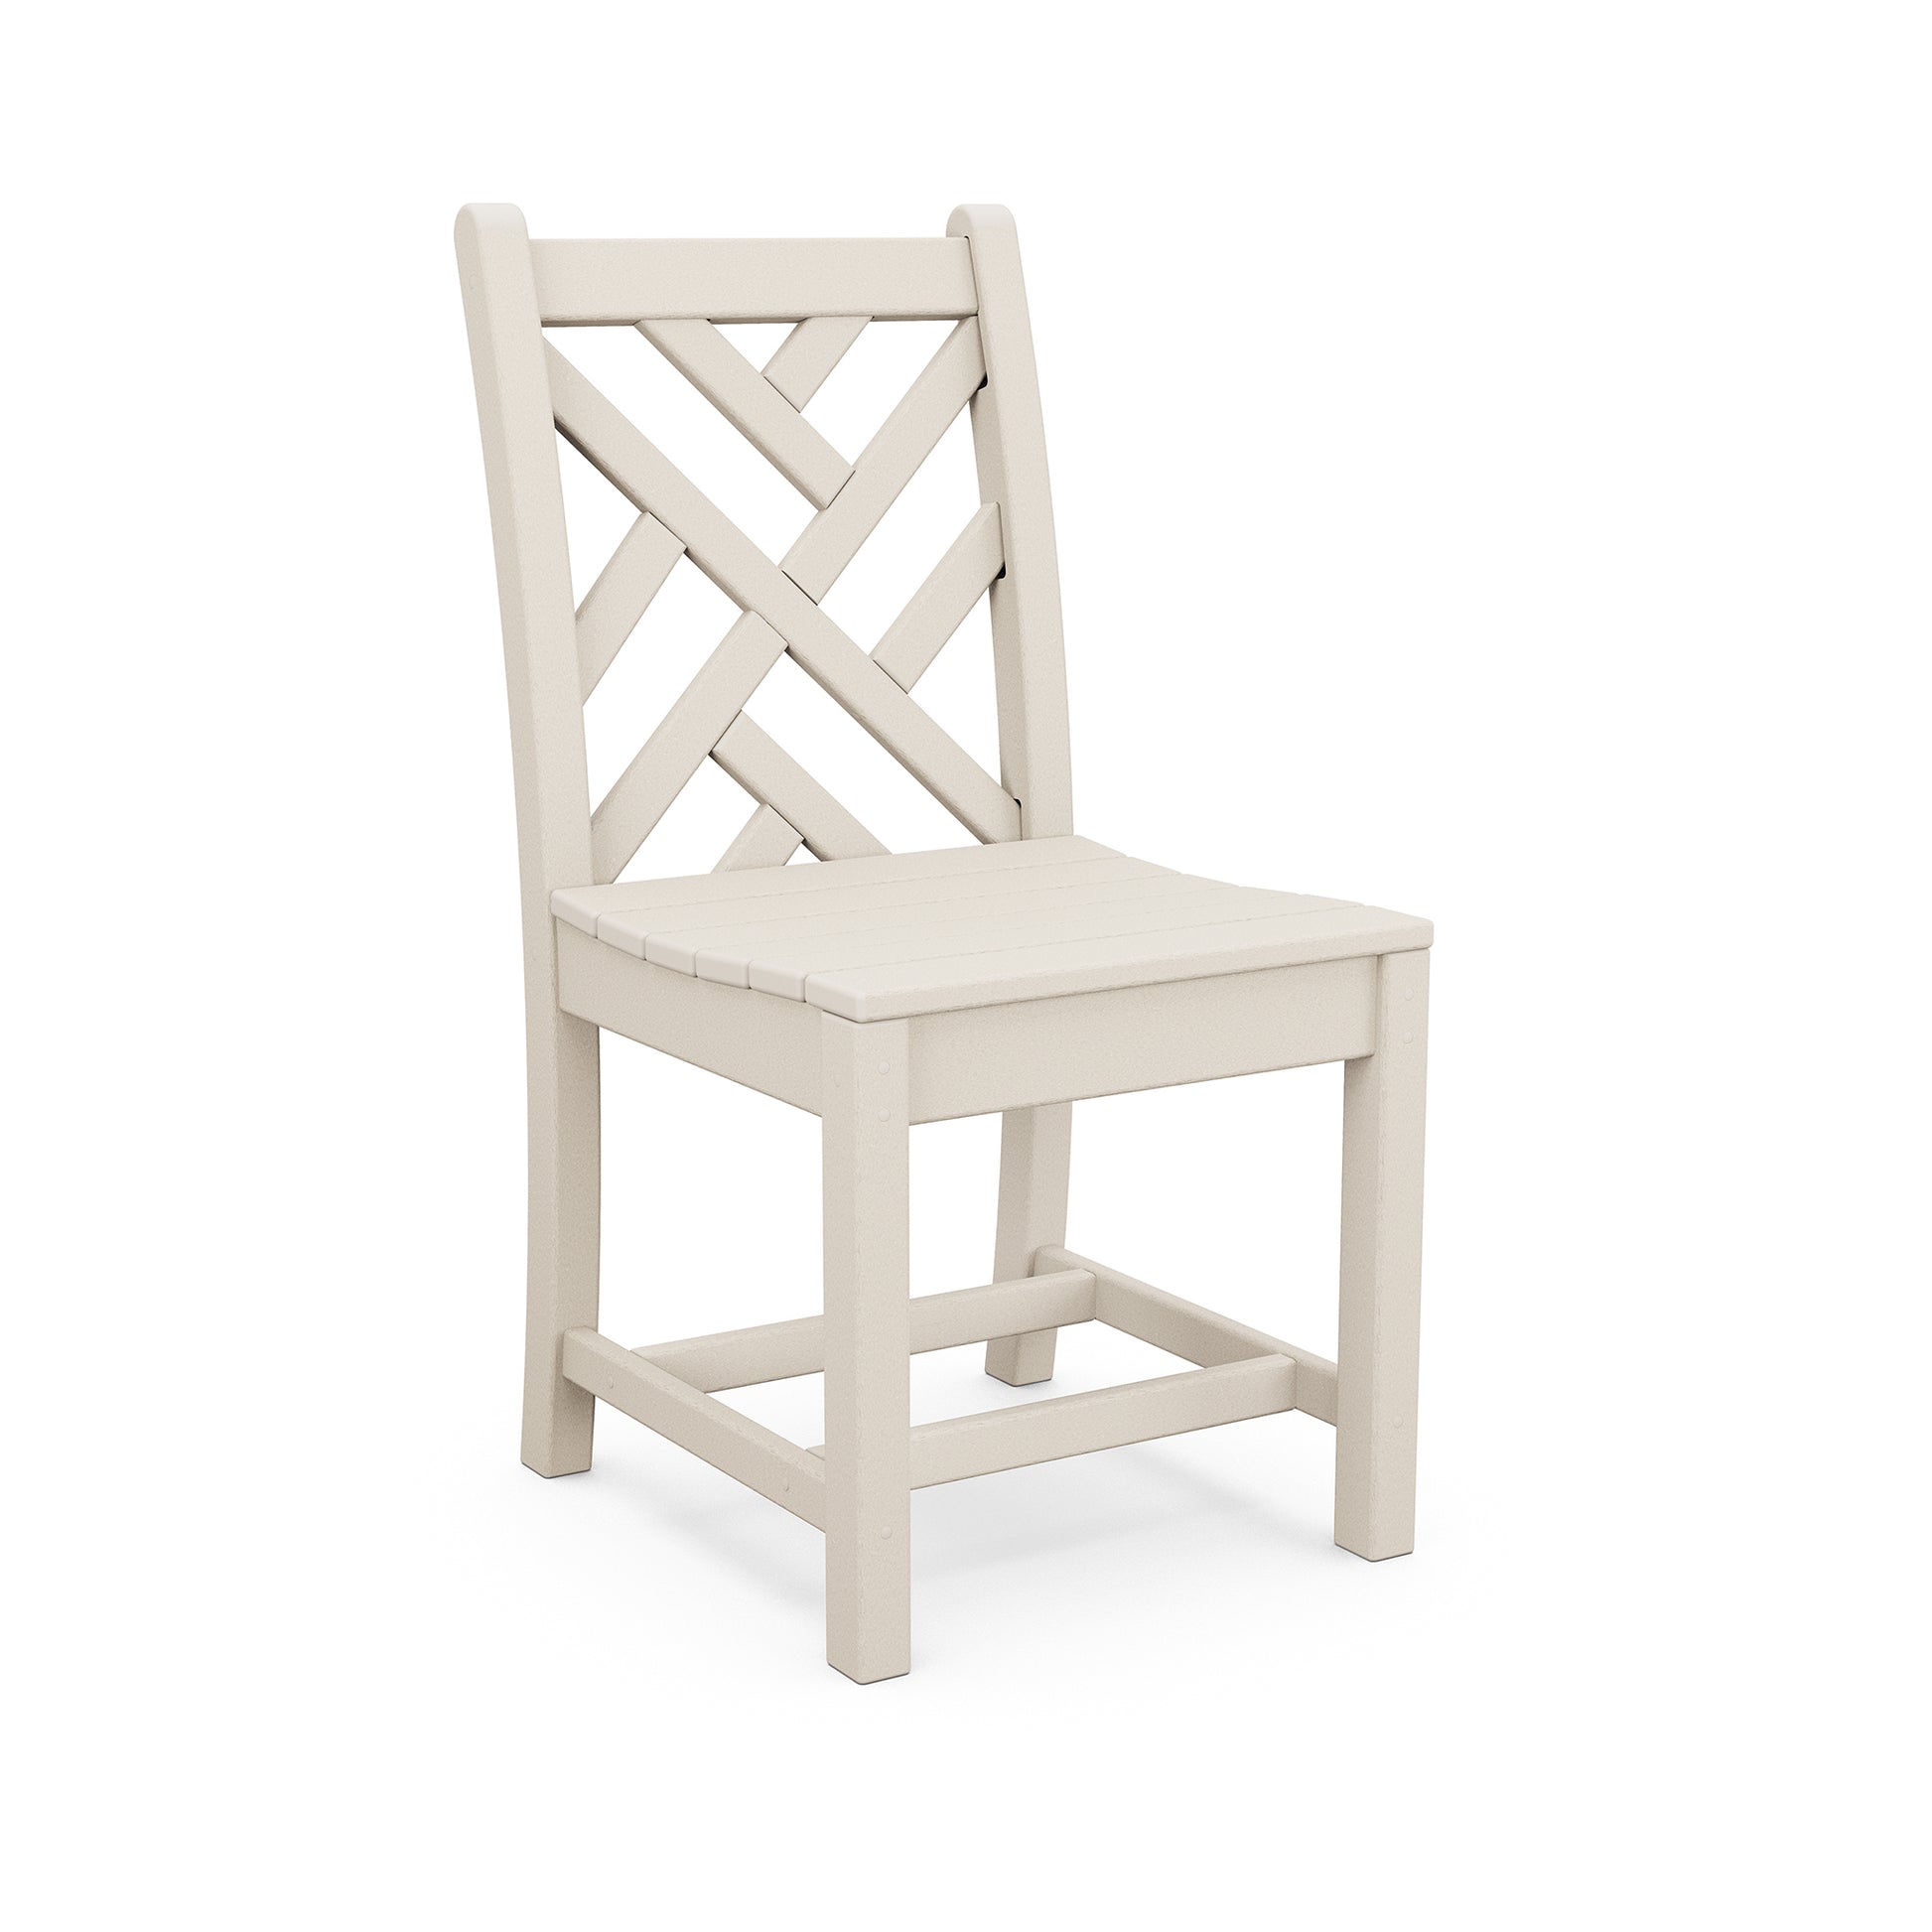 A light beige POLYWOOD® Chippendale Outdoor Dining Side Chair with a crisscross back design and a square seat, isolated on a white background.